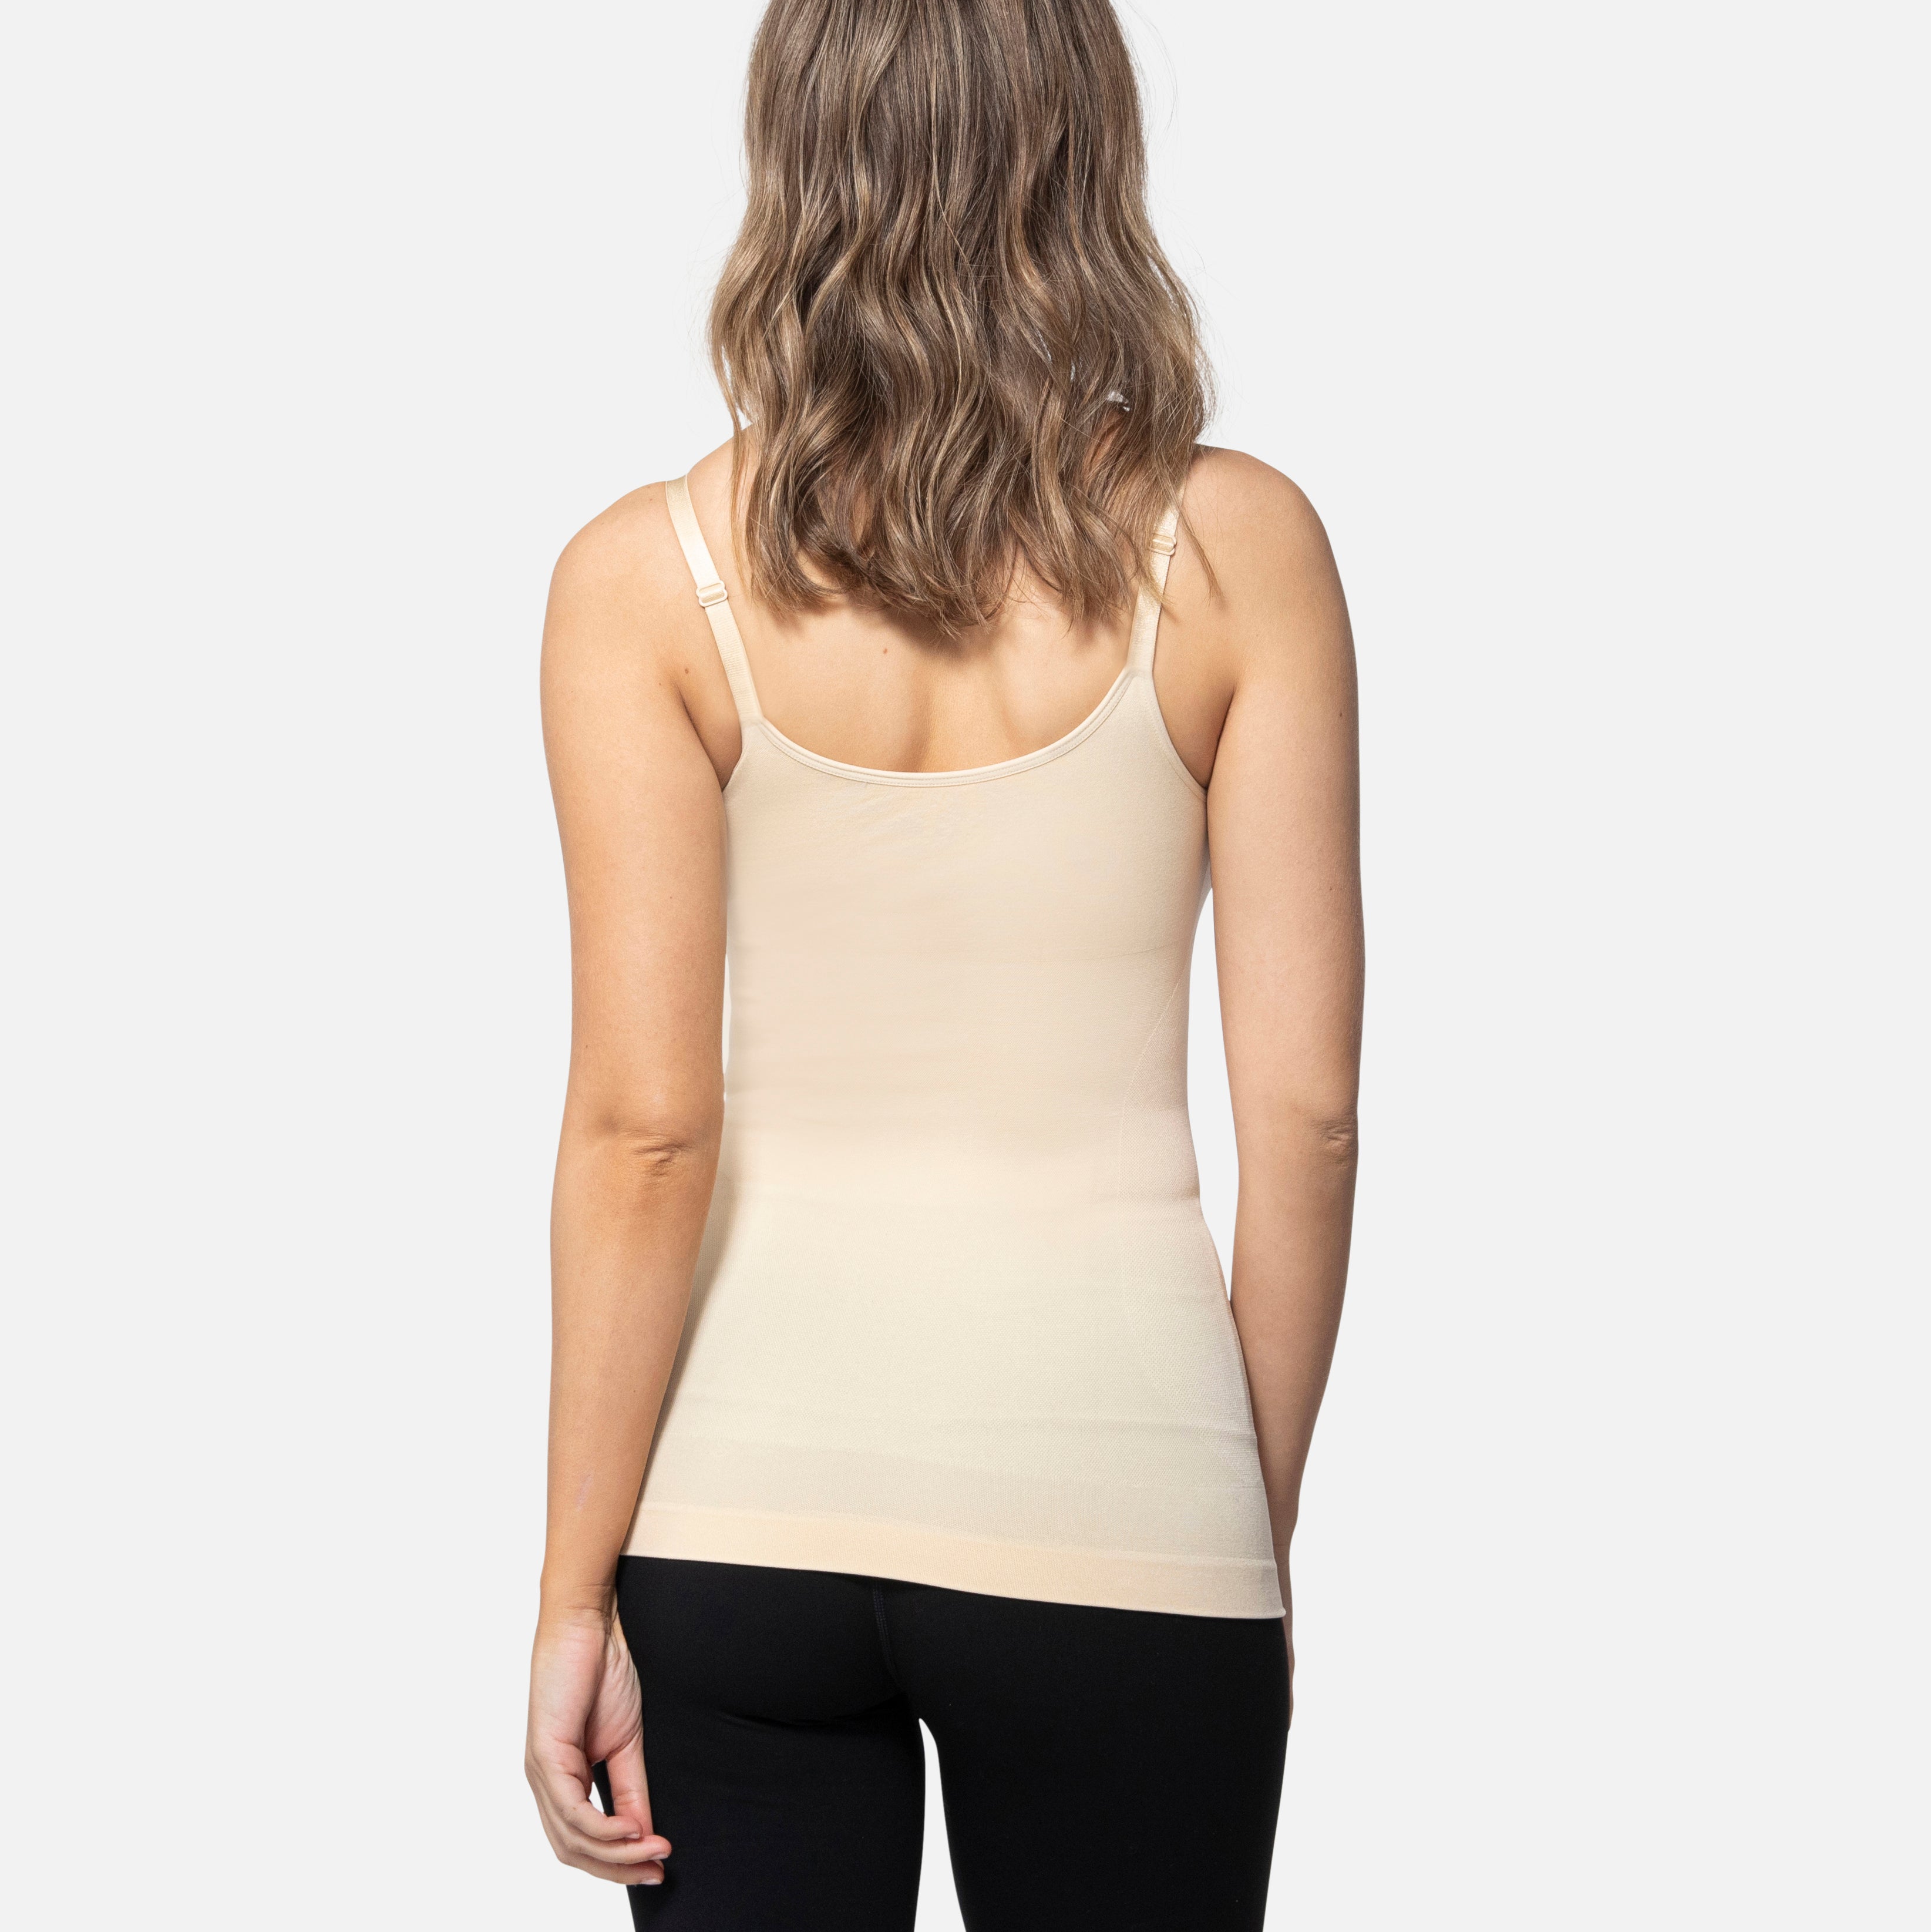 The Cami Everyone's Talking About, Upgrade all your outfits without  breaking the bank!💕 Look your best with this Cami that smooths and shapes  all the right places ✨